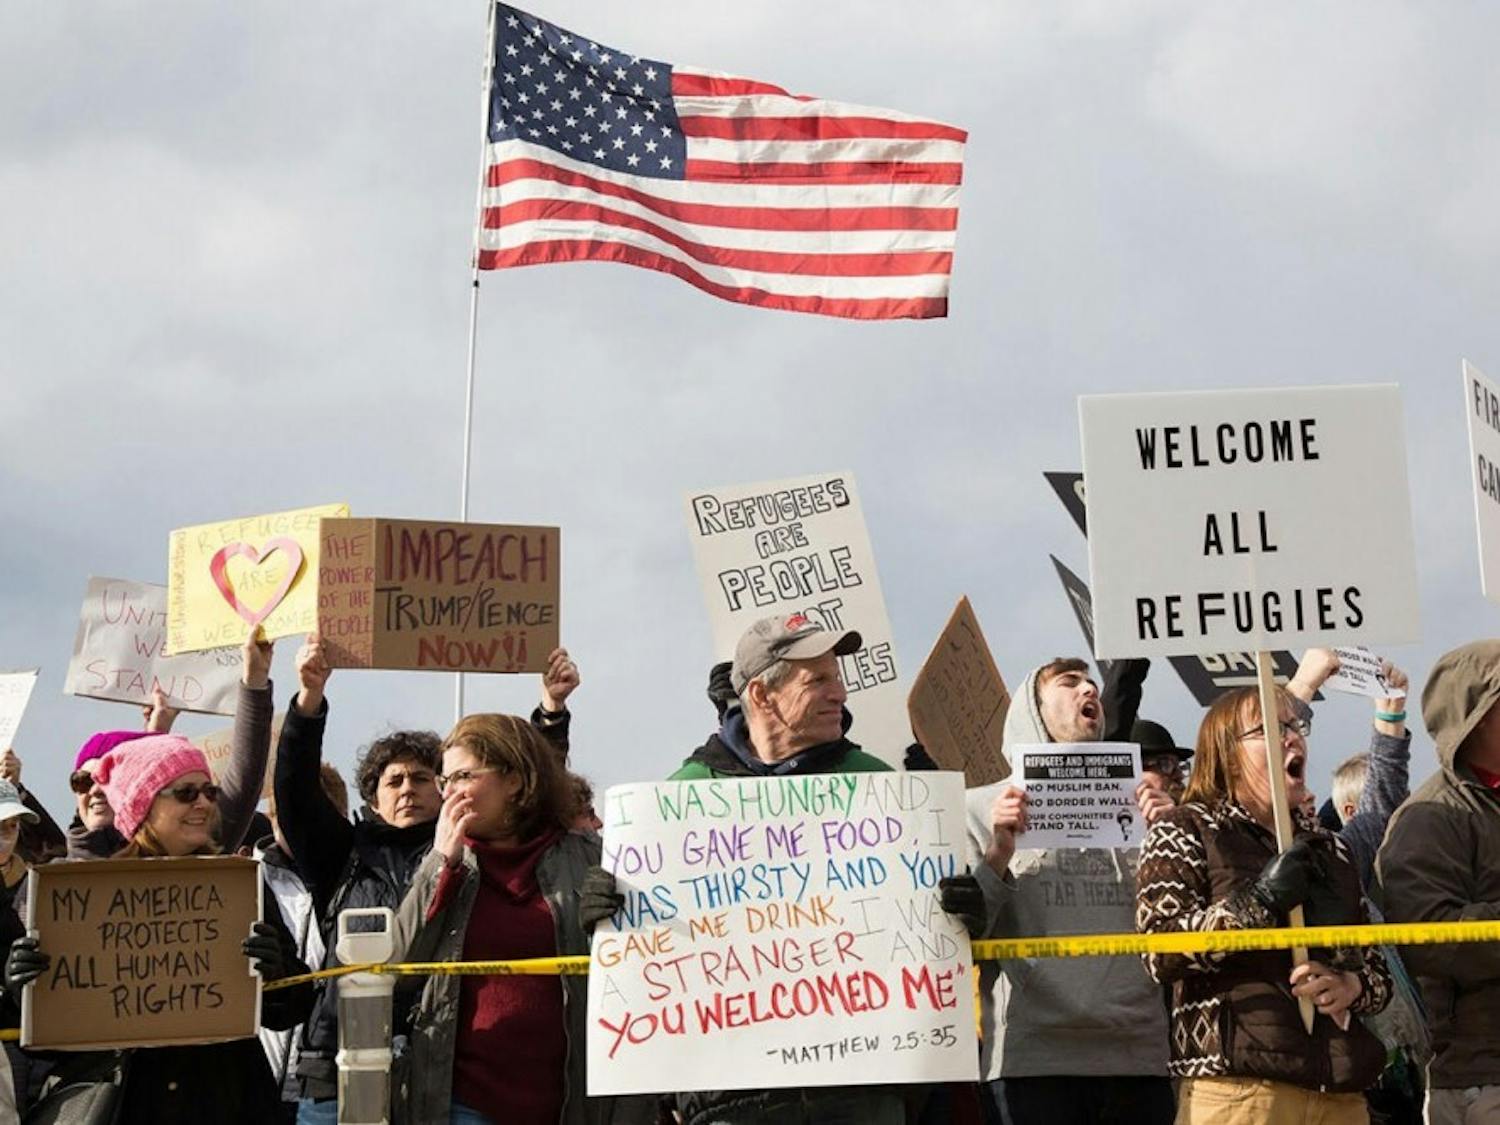 Protesters gather outside terminal two at RDU Airport on Jan. 29 in response to President Donald Trump's executive order banning immigrants from certain countries from entering the U.S.